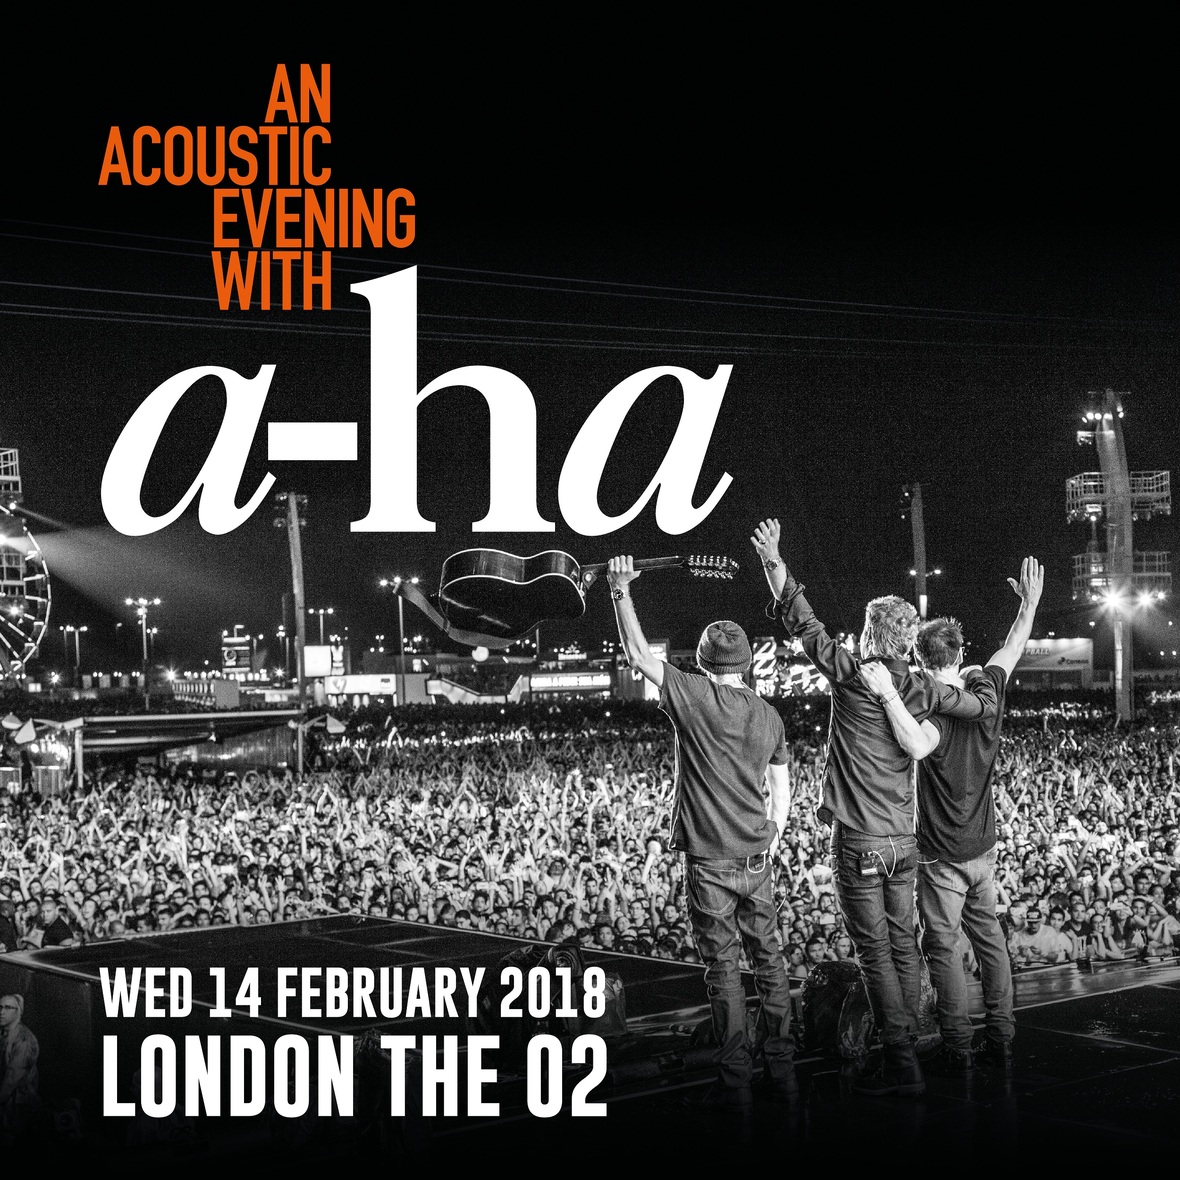 AHa add London show to next year's European acoustic tour schedule